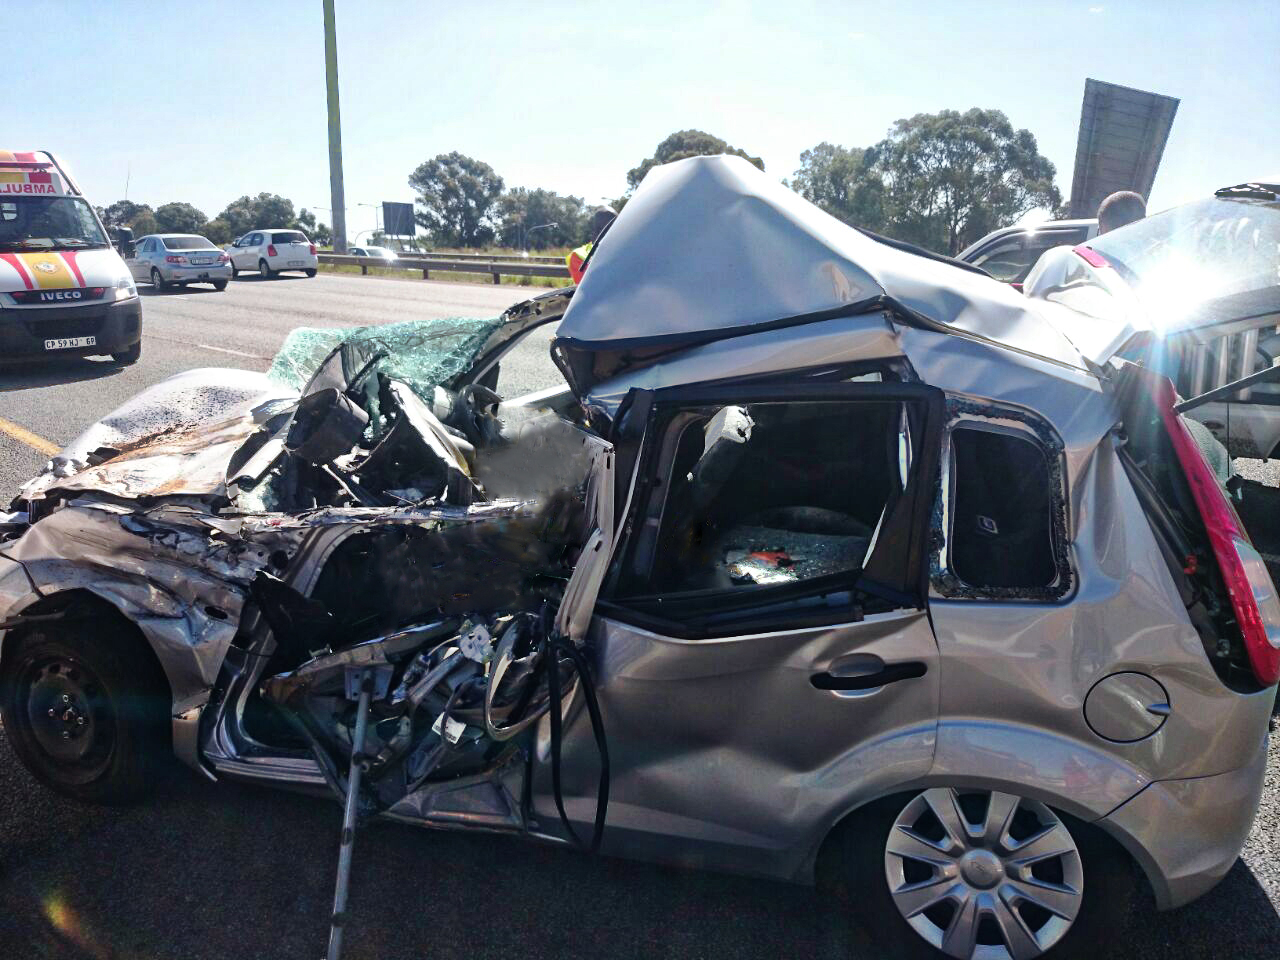 Rear-end Crash at Intersection on the R21 at Kempton Park leaves one dead